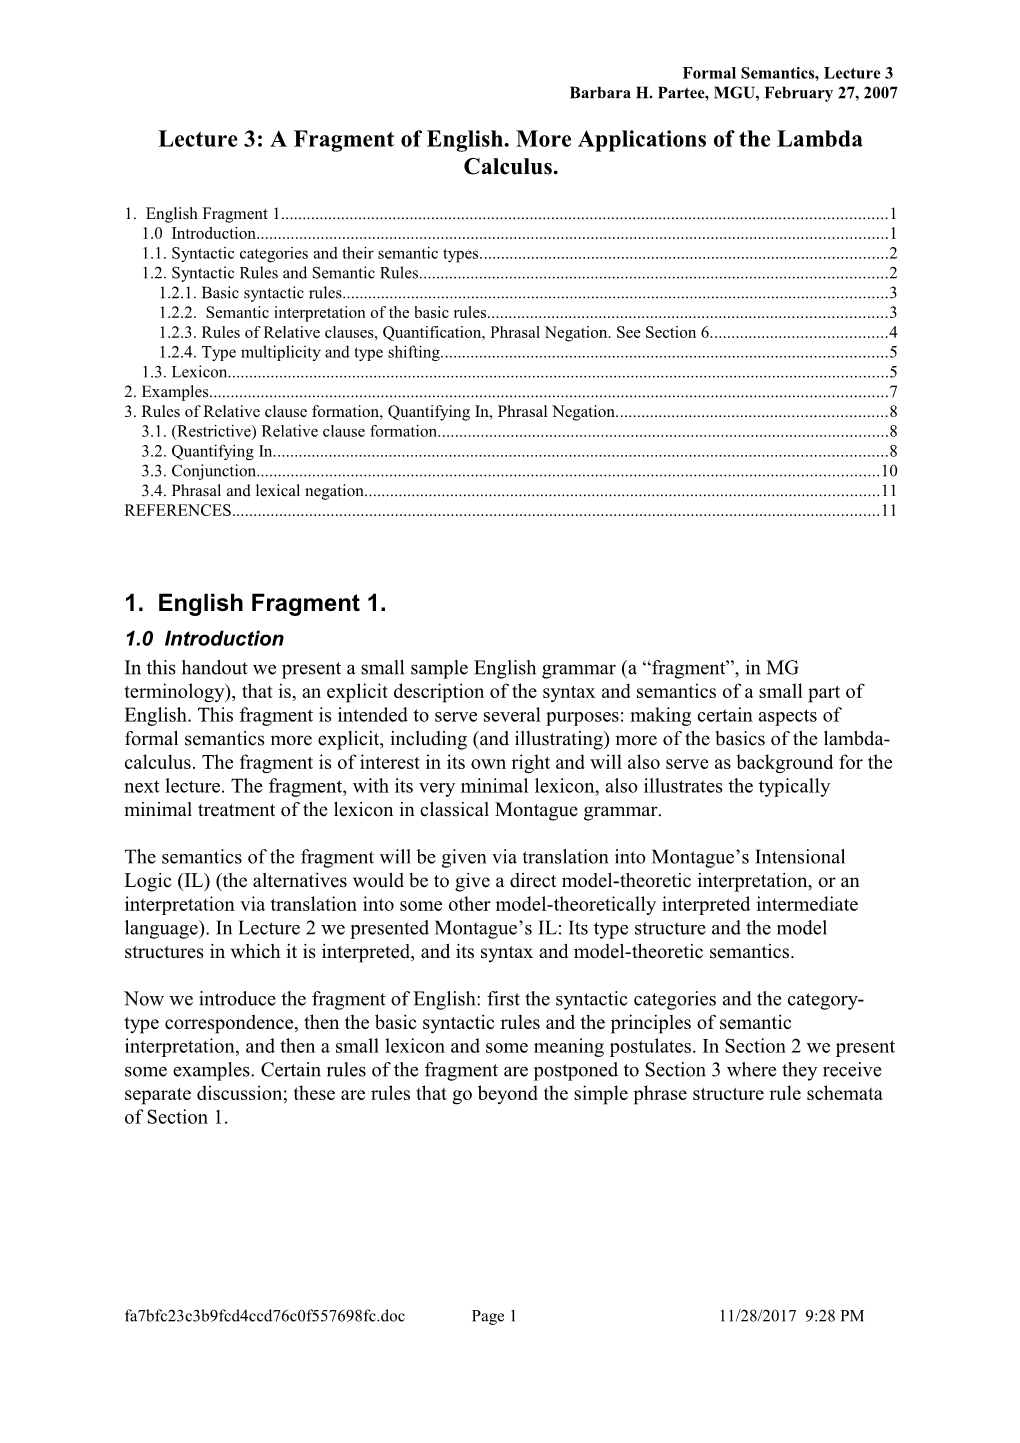 Lecture 3: A Fragment Of English